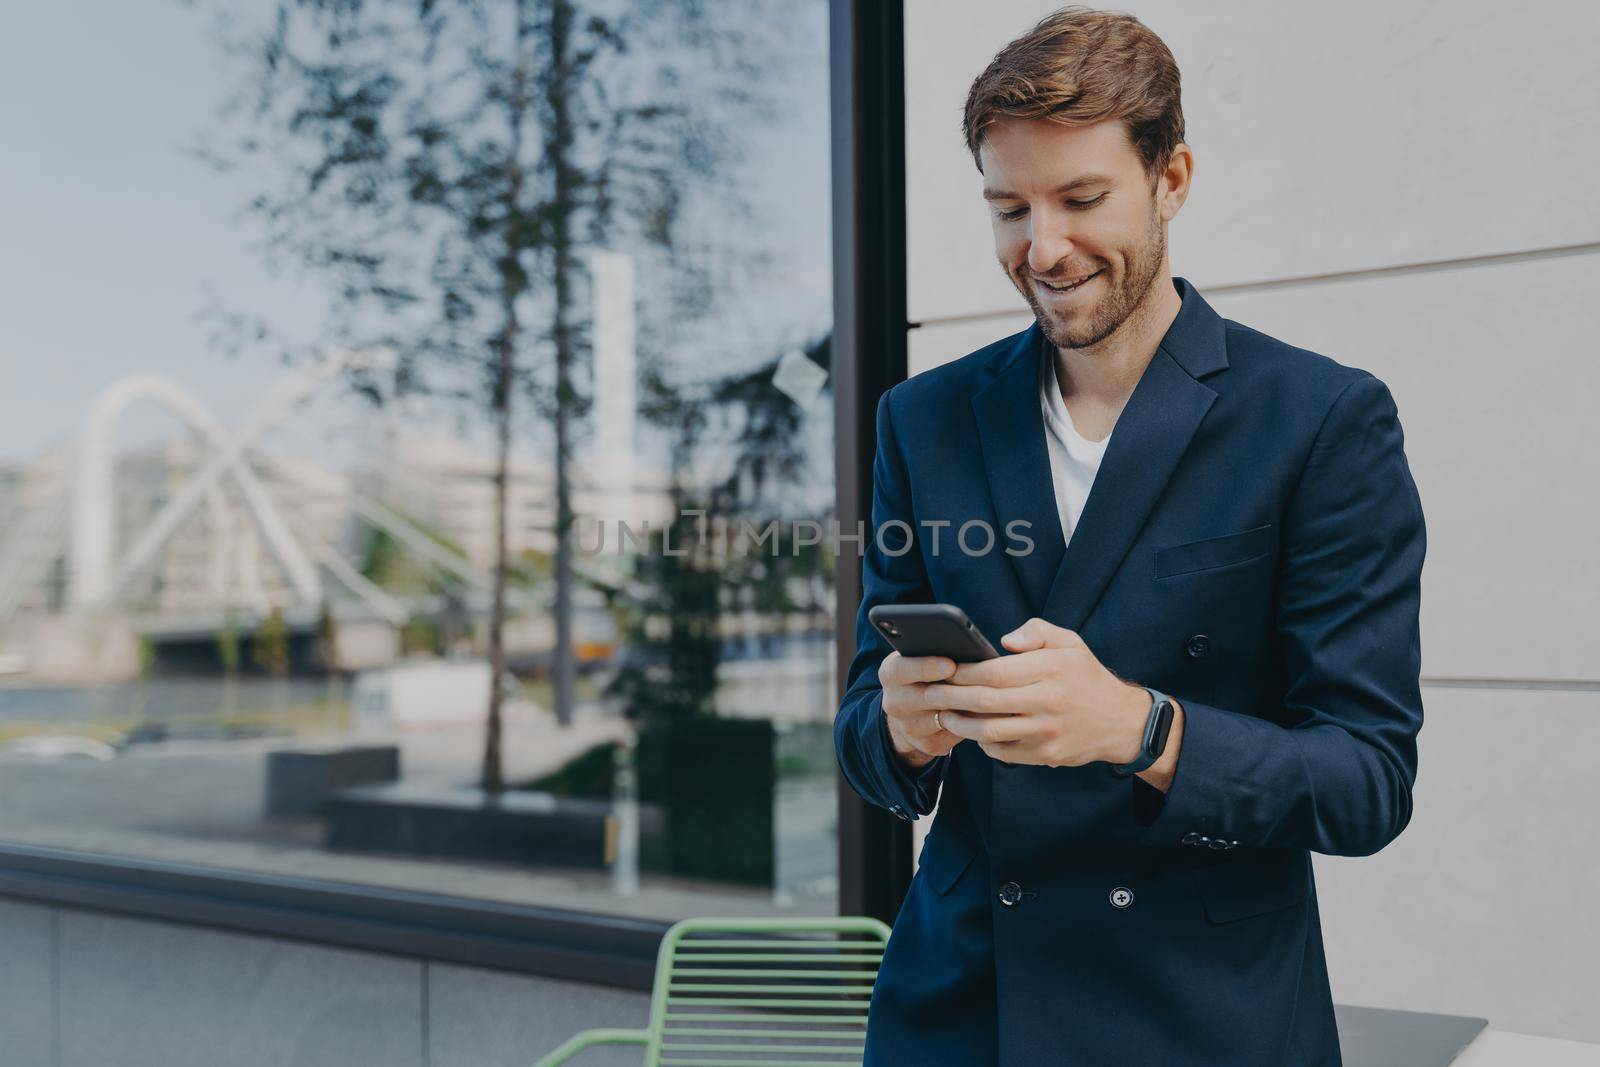 Pleased handsome male CEO or director holds mobile phone waits for call scrolls social networks while waiting for partner near outdoor cafe wastes time online dressed in elegant formal suit.